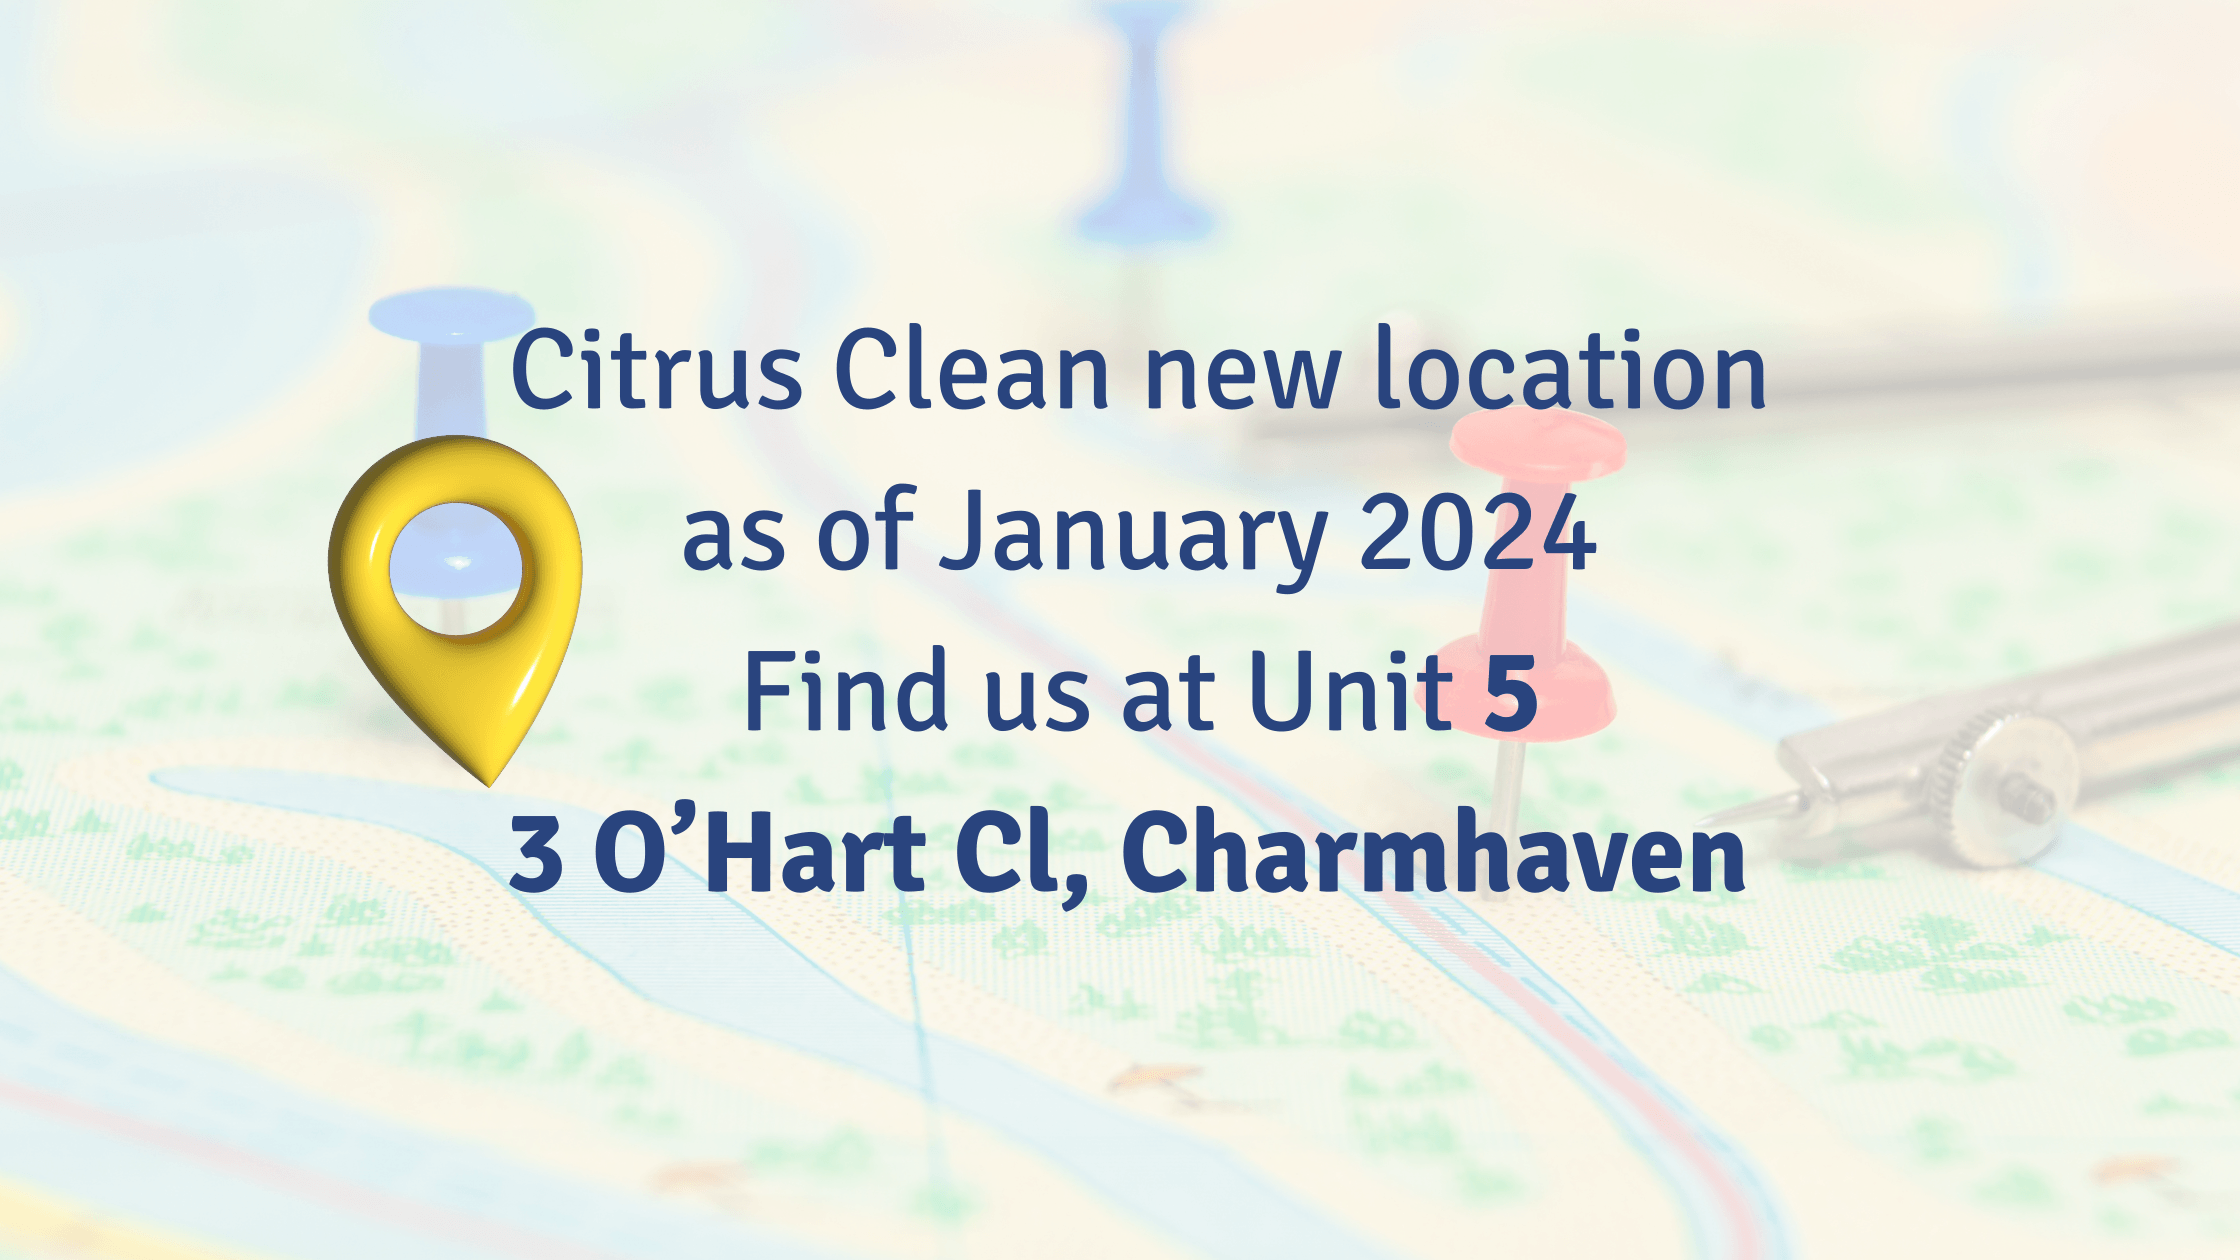 Jan 2024! Citrus Clean HQ has moved to bigger and better premises in Charmhaven. 3 O'Hart Close. 3